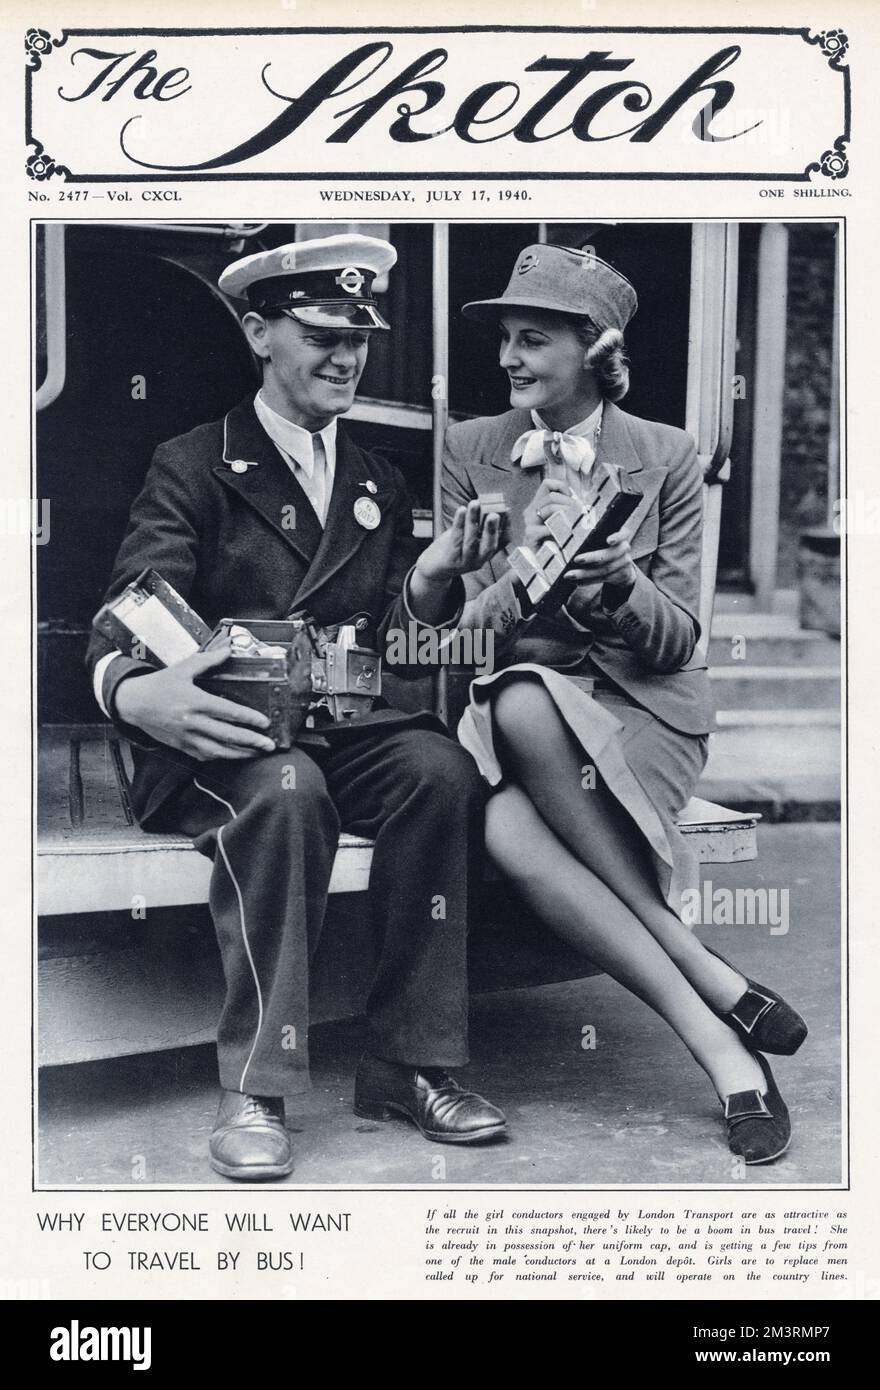 London transport recruiting female bus conductors to replace men called up for national service.   1940 Stock Photo